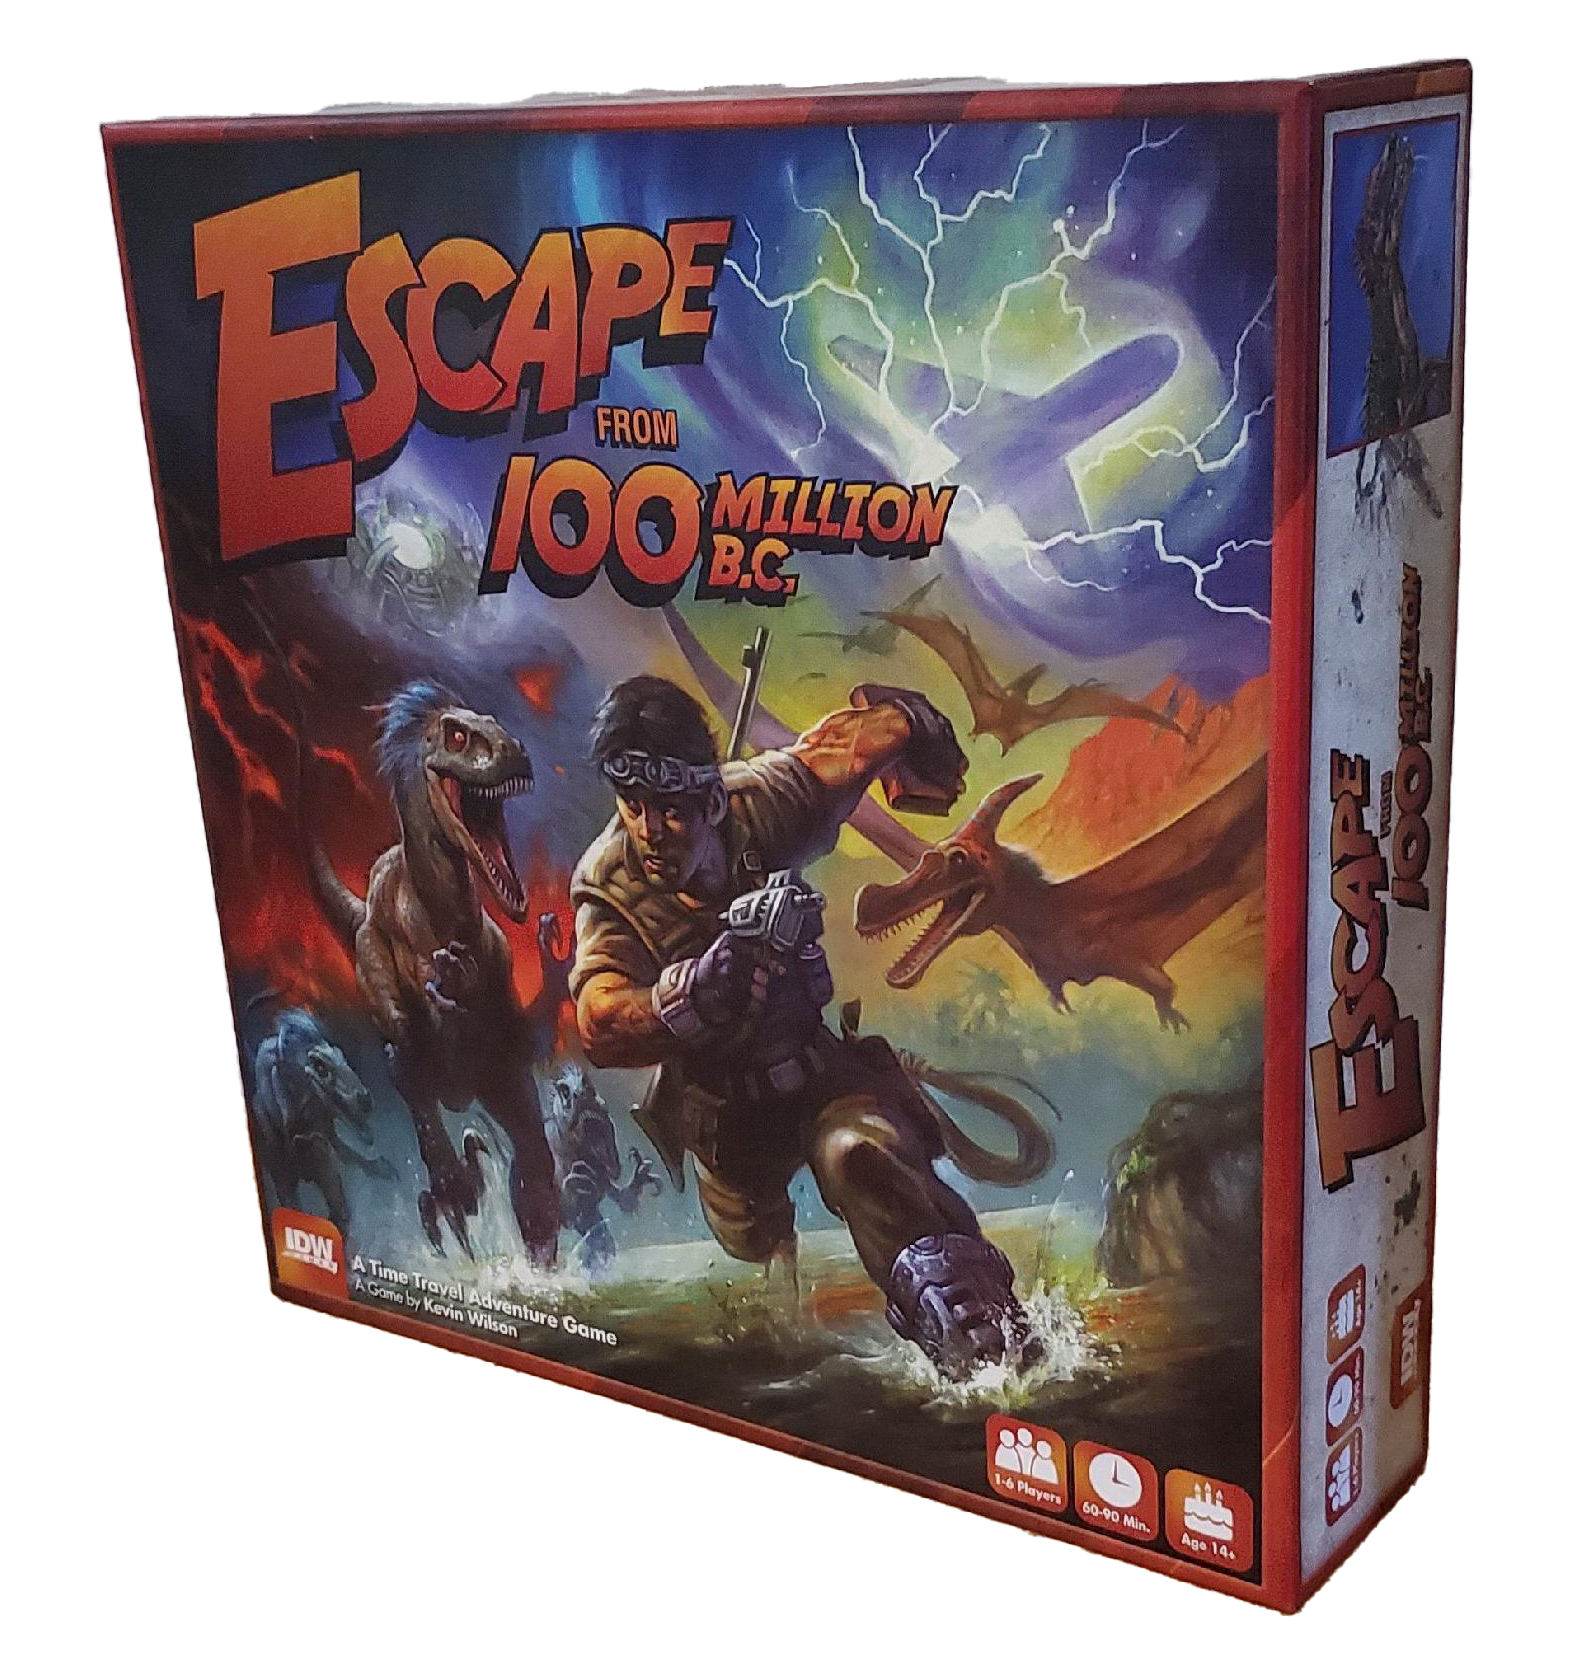 Escape from 100 Million BC board game by IDW